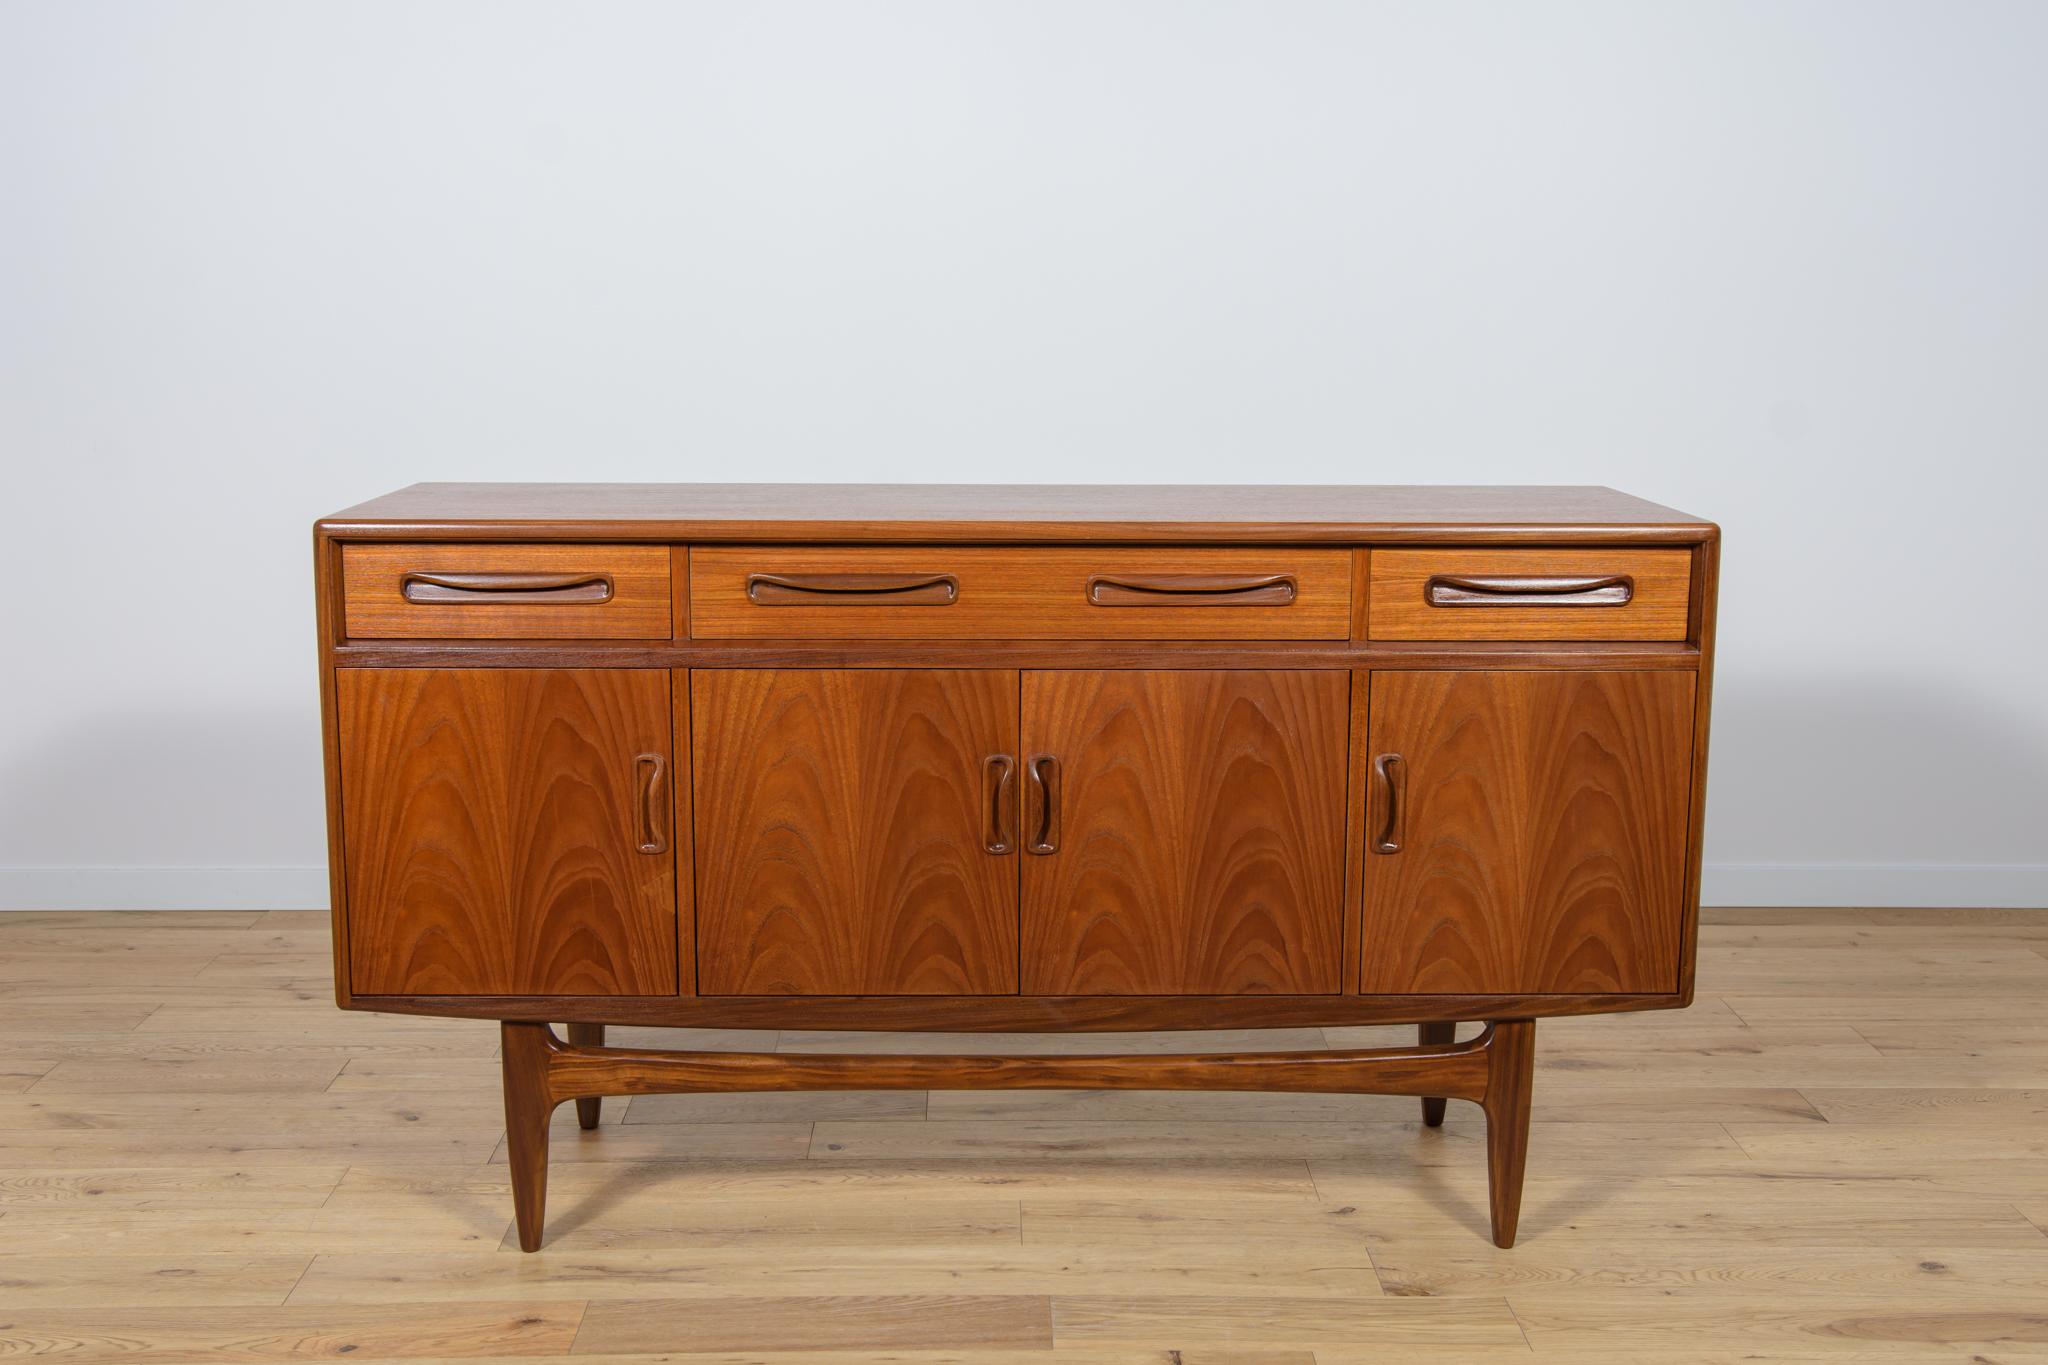 This elegant Scandinavian influenced credenza designed by Victor Wilkins became an instant Classic for G-Plan, it is an exceptionally well-balanced design with dark Afromosia sculpted handles and trim contrasting against the teak veneer. It sits